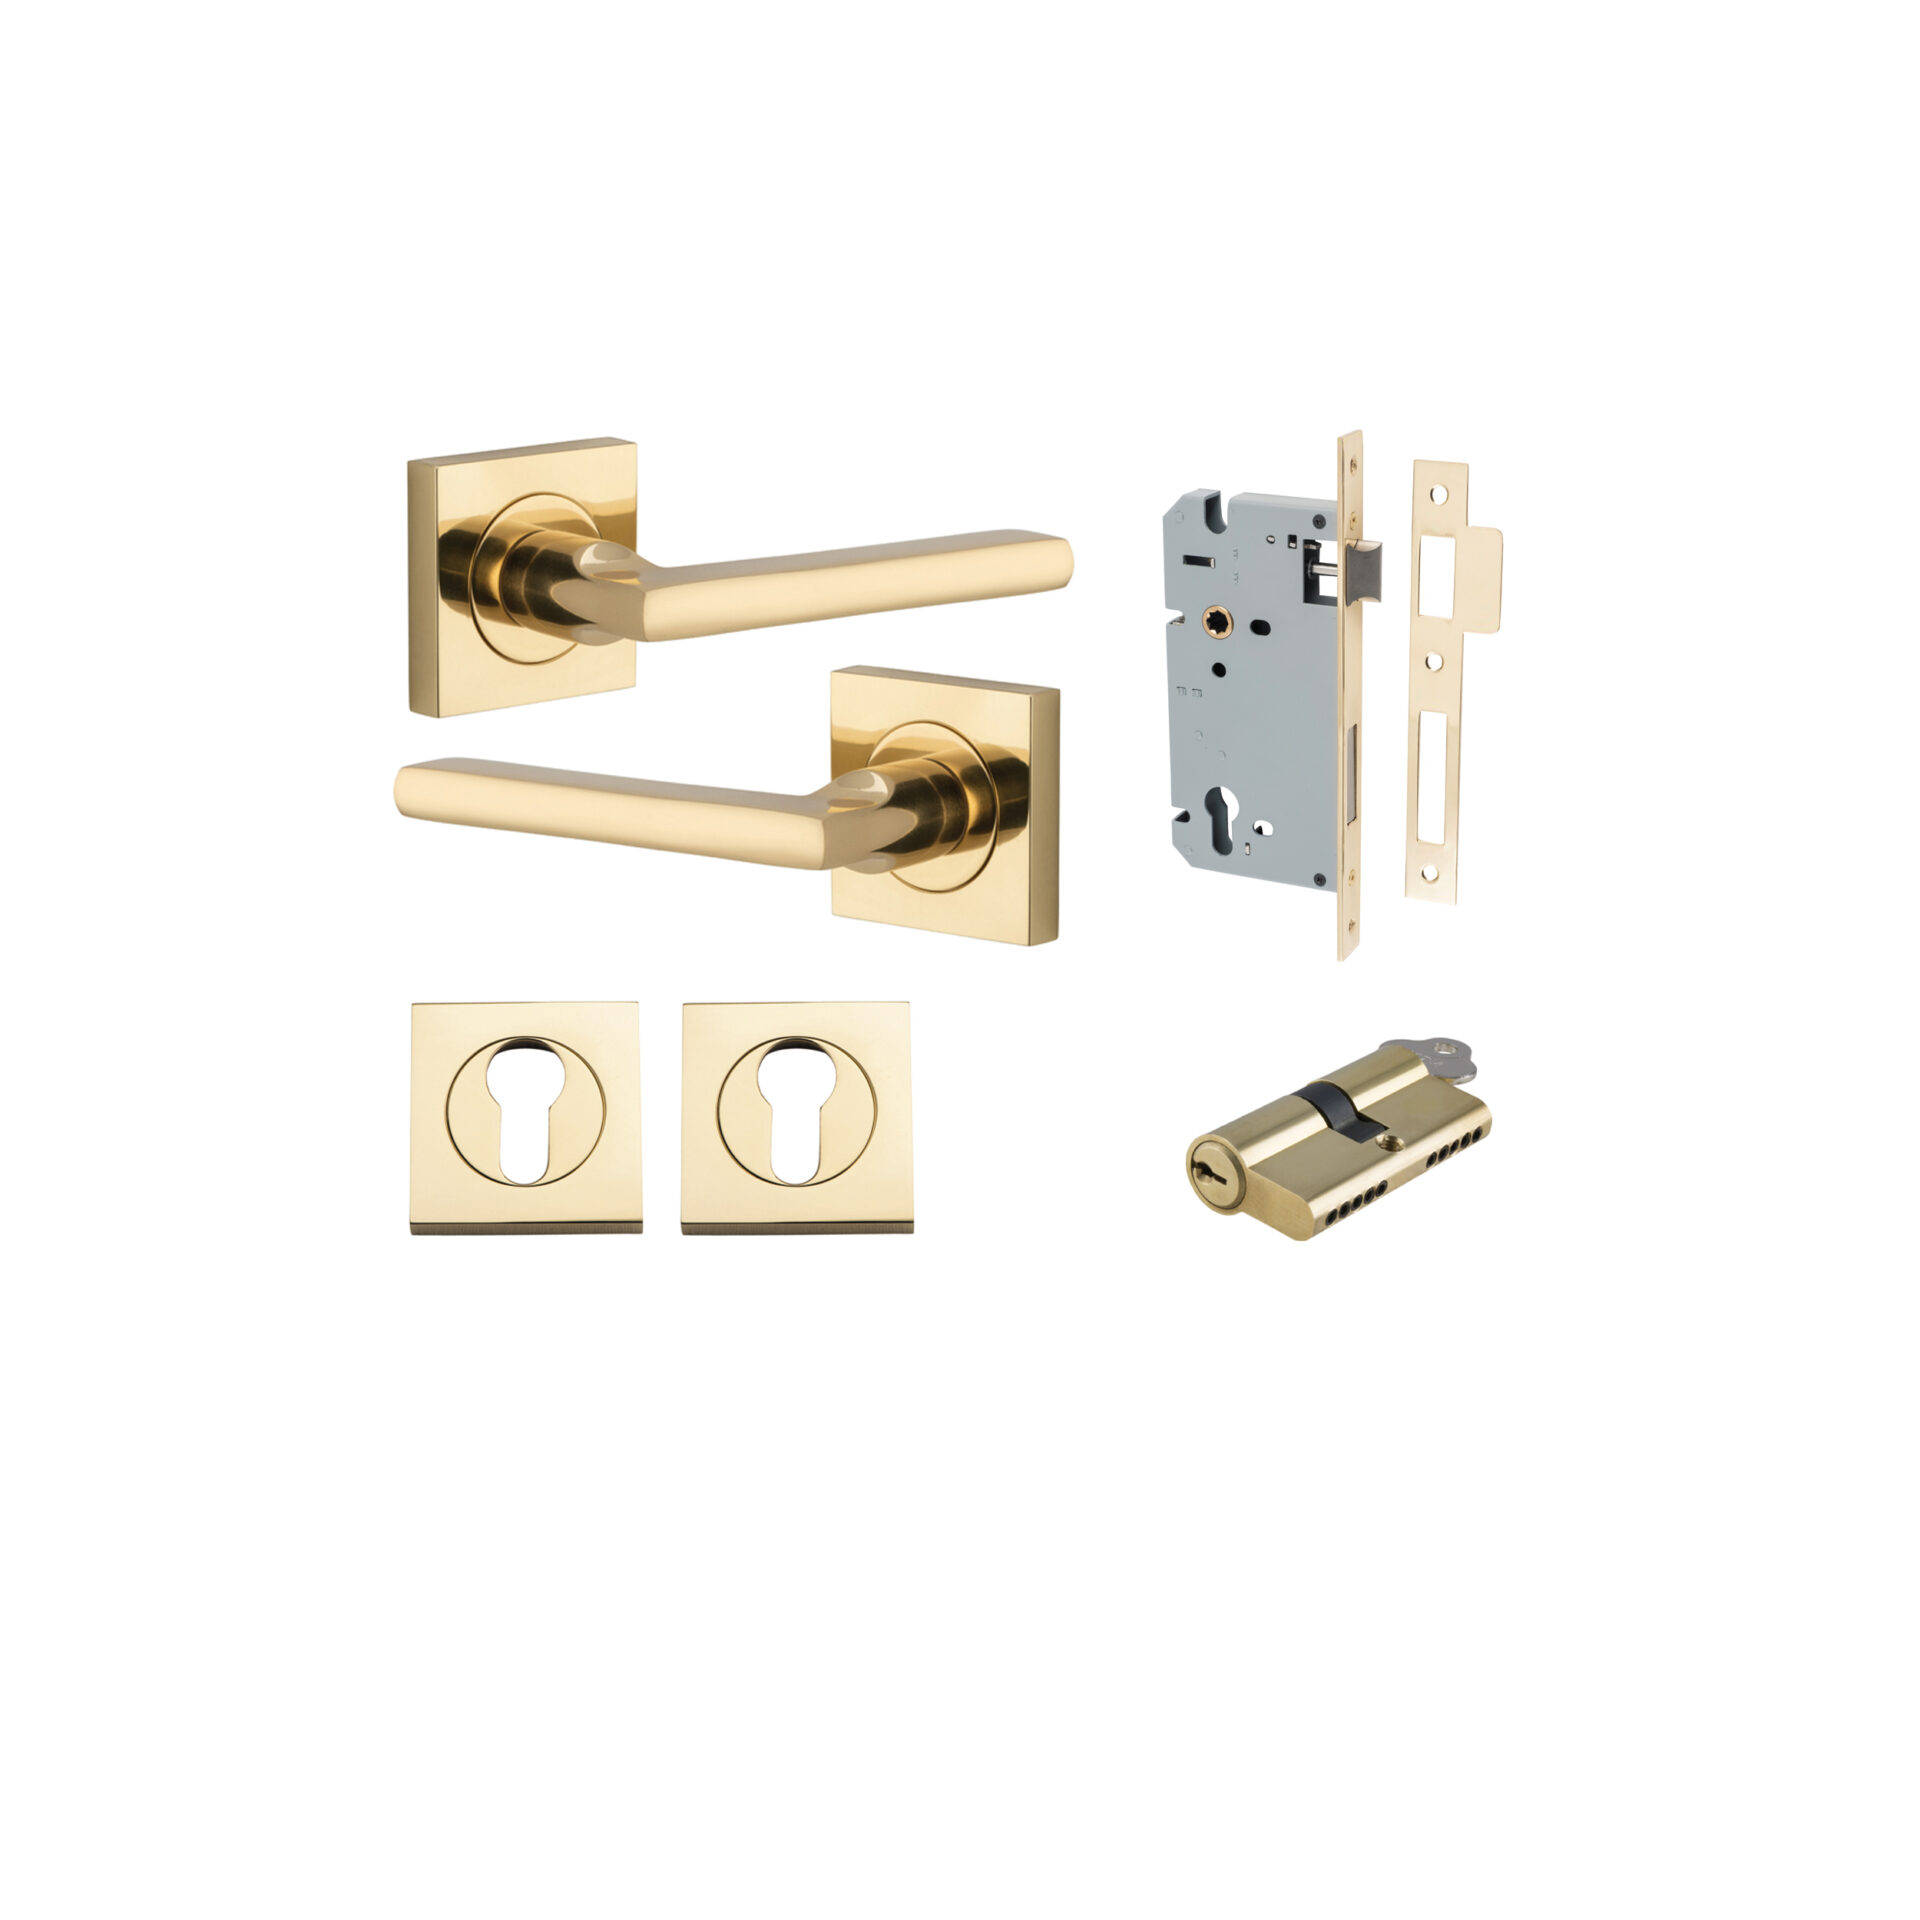 Baltimore Lever - Square Rose Entrance Kit with Separate High Security Lock